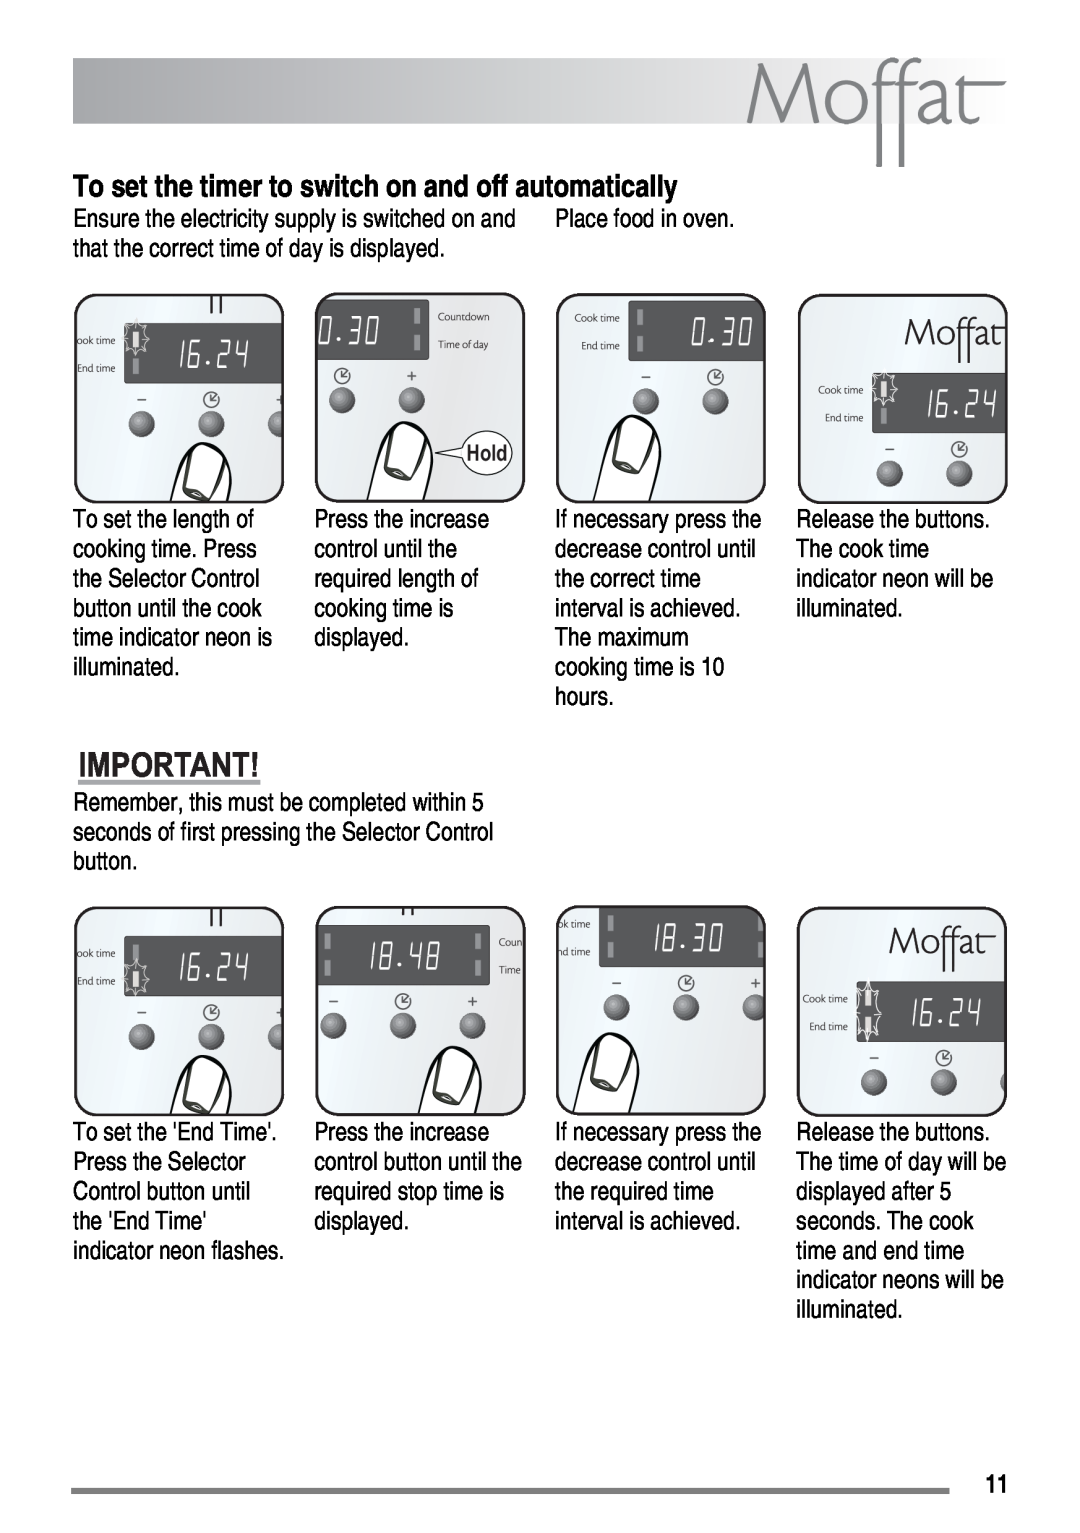 Moffat MDB900 user manual that the correct time of day is displayed 